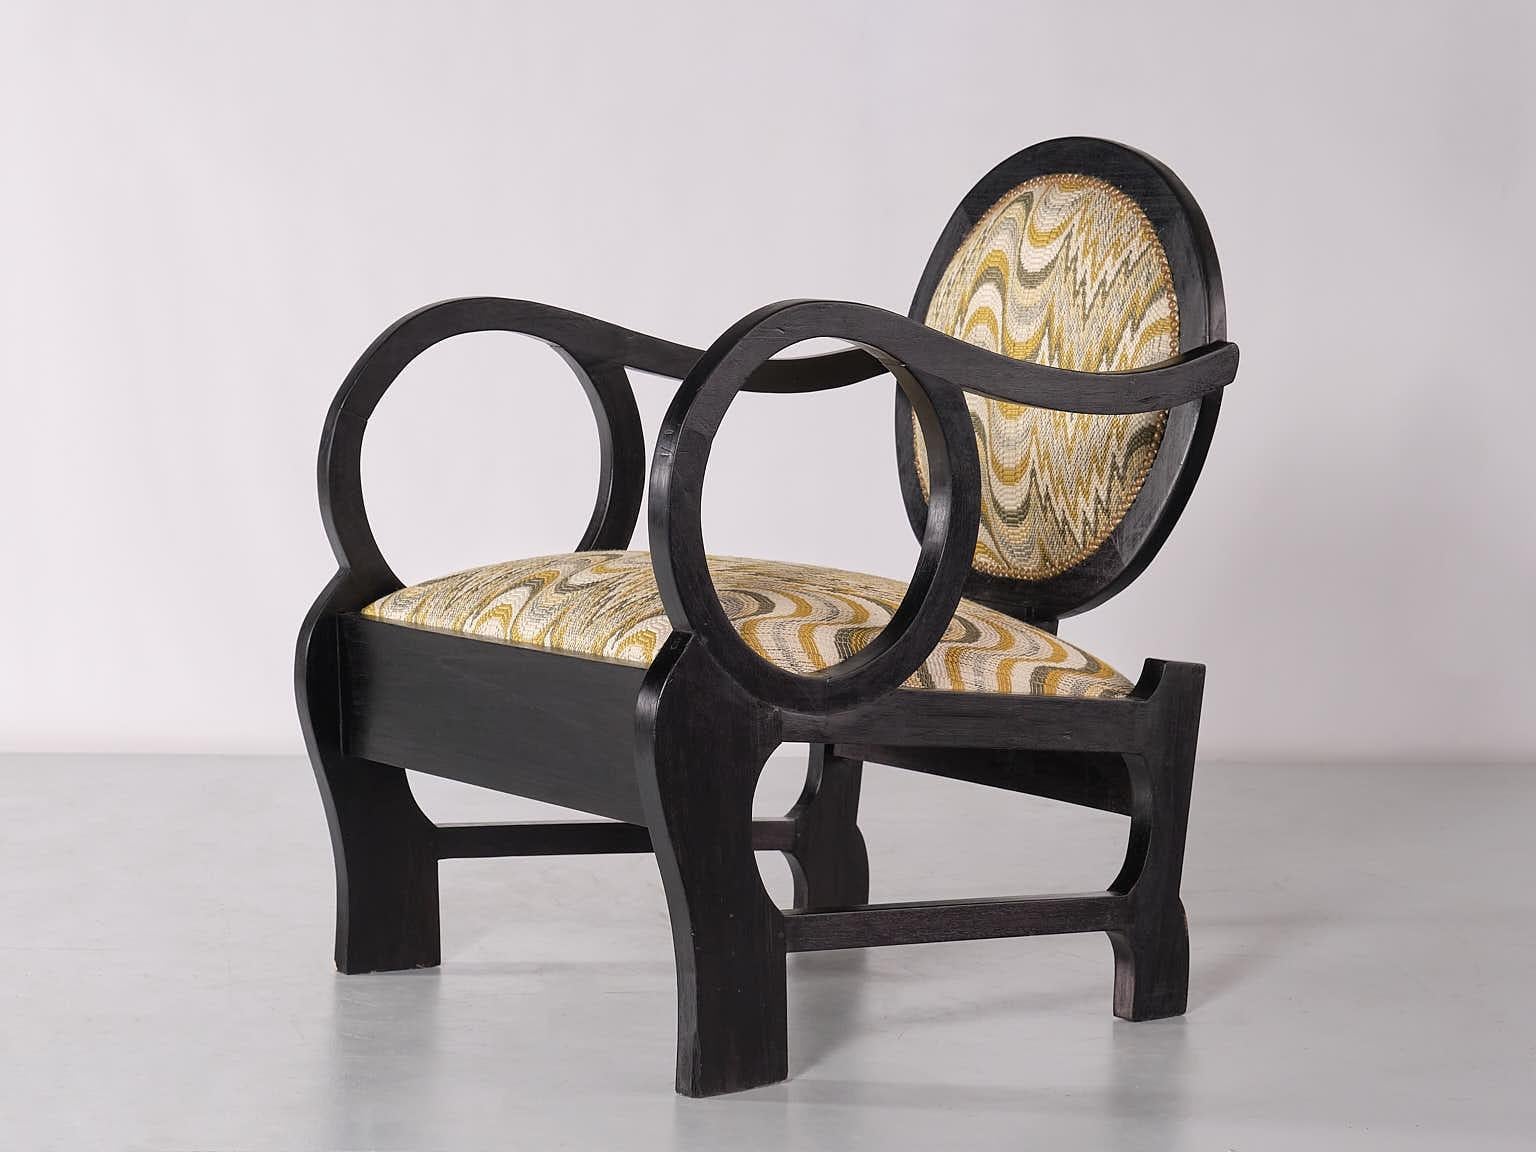 Pair of Lajos Kozma Attributed Armchairs in Oak and Dedar Jacquard, Late 1940s For Sale 6